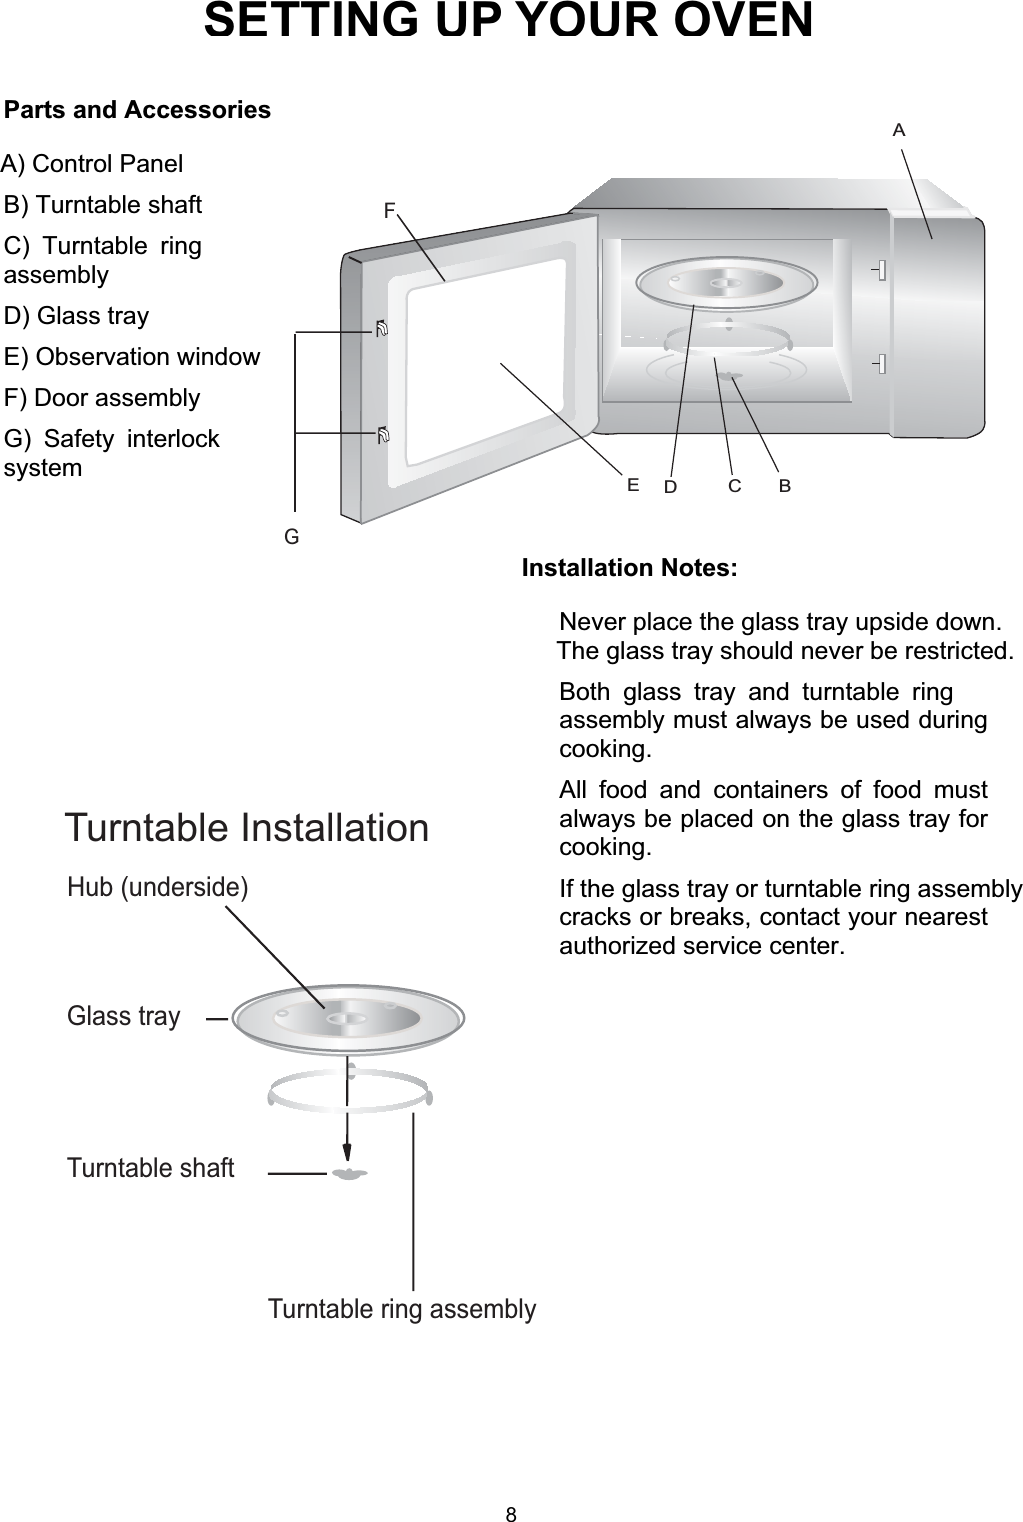 SETTING UP YOUR OVENParts and AccessoriesA) Control PanelB) Turntable shaftC) Turntable ringassemblyD) Glass trayE) Observation windowF) Door assemblyG) Safety interlocksystemInstallation Notes:  Never place the glass tray upside down.The glass tray should never be restricted. Both glass tray and turntable ringassembly must always be used duringcooking. All food and containers of food mustalways be placed on the glass tray forcooking.  If the glass tray or turntable ring assemblycracks or breaks, contact your nearestauthorized service center.FGACBEDHub (underside)Glass trayTurntable ring assemblyTurntable InstallationTurntable shaft8